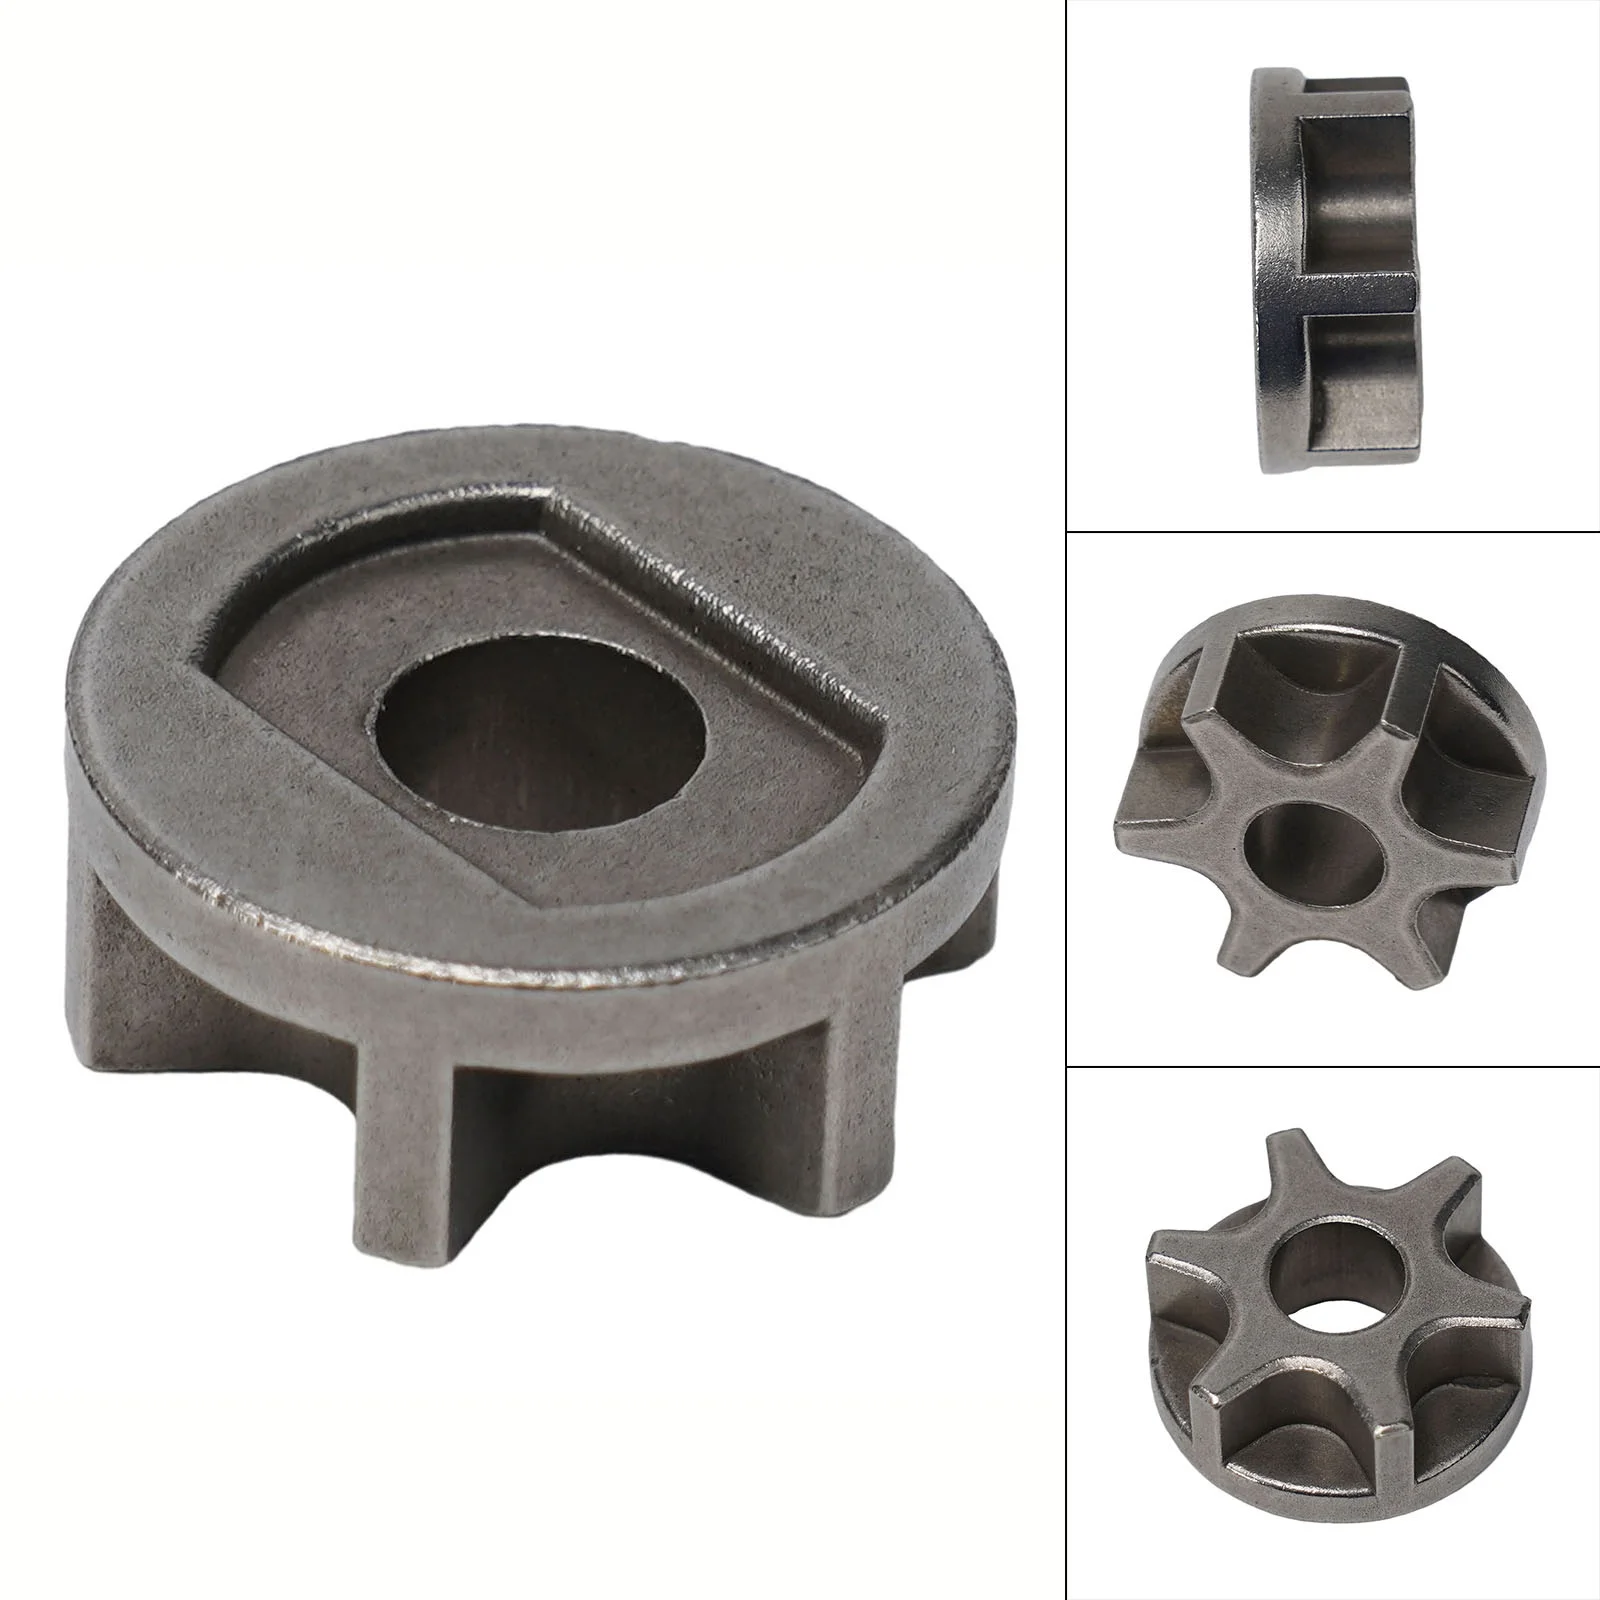 For M10-100 Angle Grinder Accessory Angle Grinder Gear Durable High Speed Steel Chain Saw M10 M14 M16 High Quality durable new angle grinder nut replace silver stainless steel 1 piece tool 1pc accessory anti rust part quick clamp